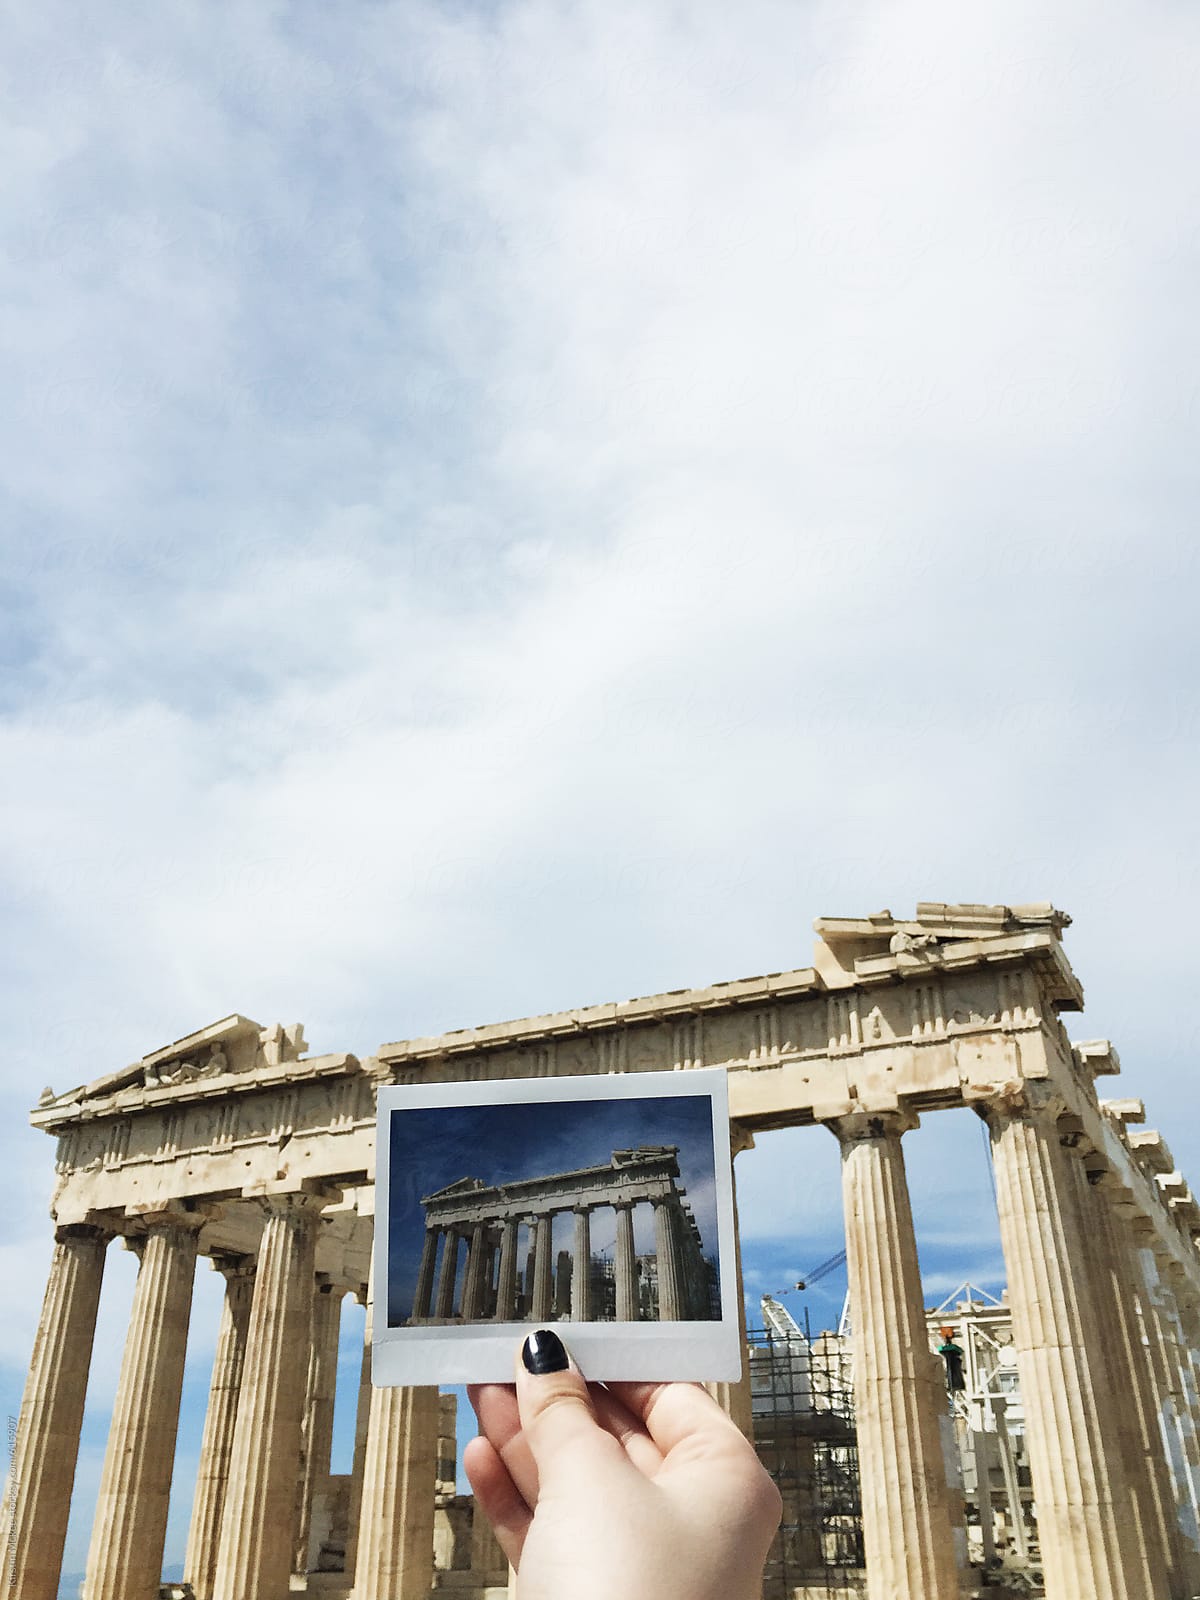 Holding up an instant image in front of the Parthenon